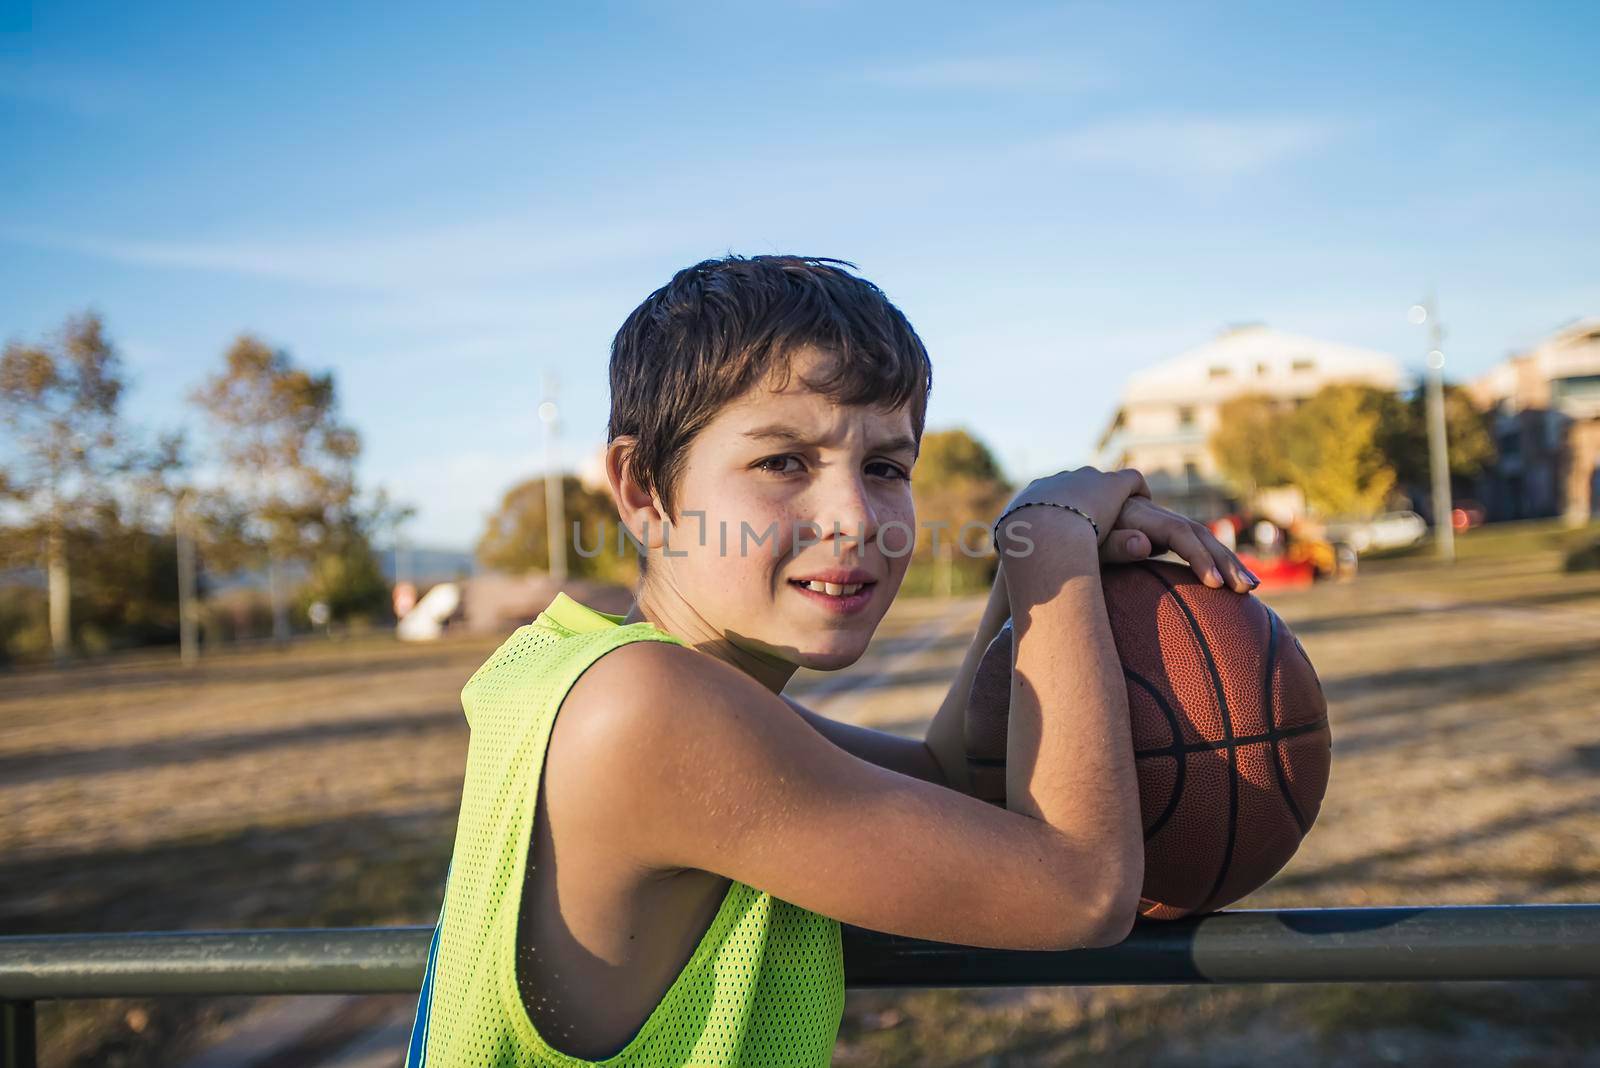 A Young teen male with sleeveless standing on a street basket court while smiling at camera